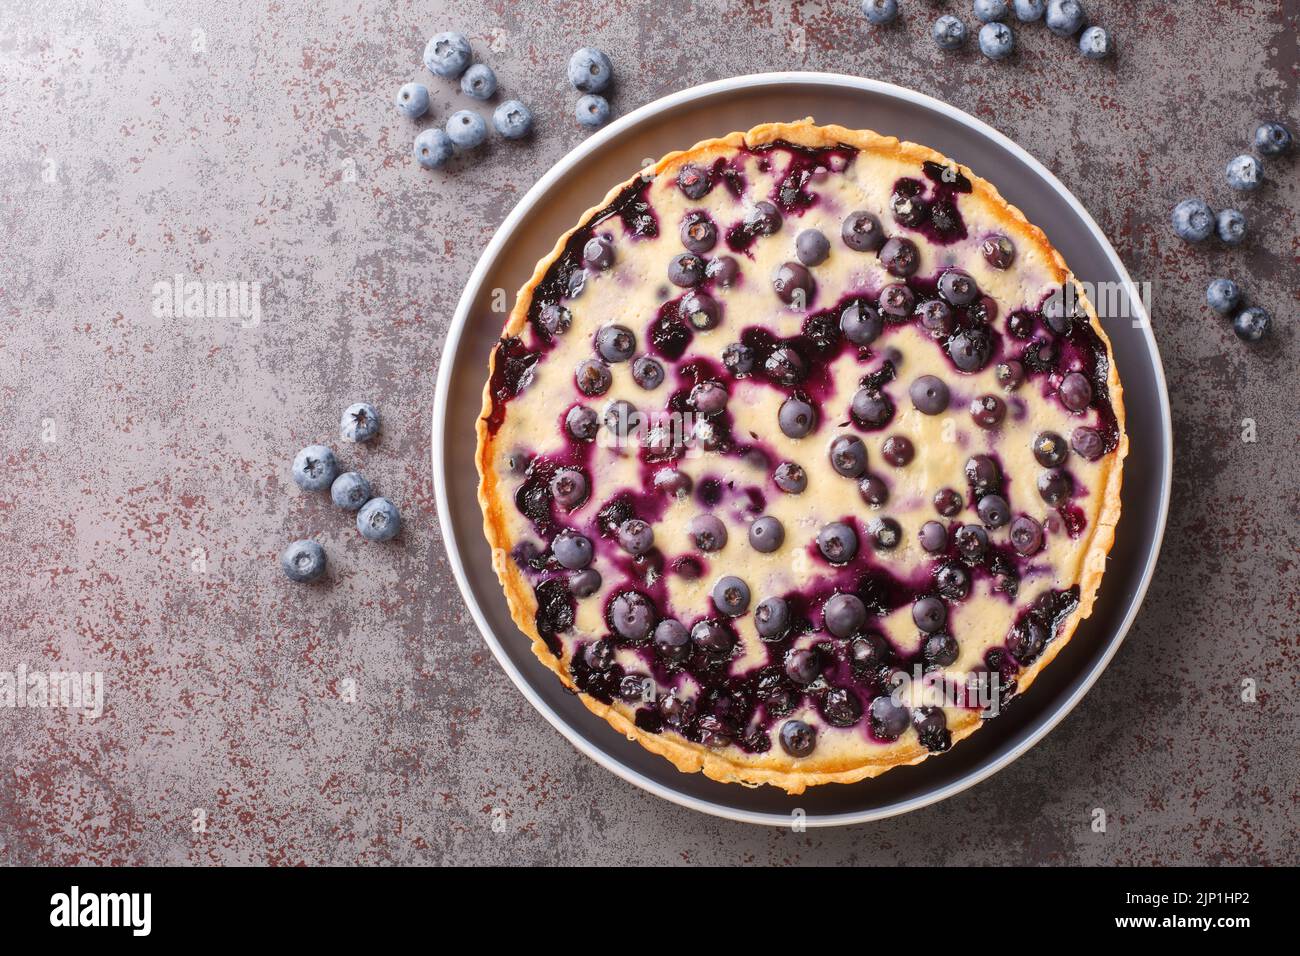 Delicious blueberry tart with custard and crispy crust close-up in a plate on the table. Horizontal top view from above Stock Photo